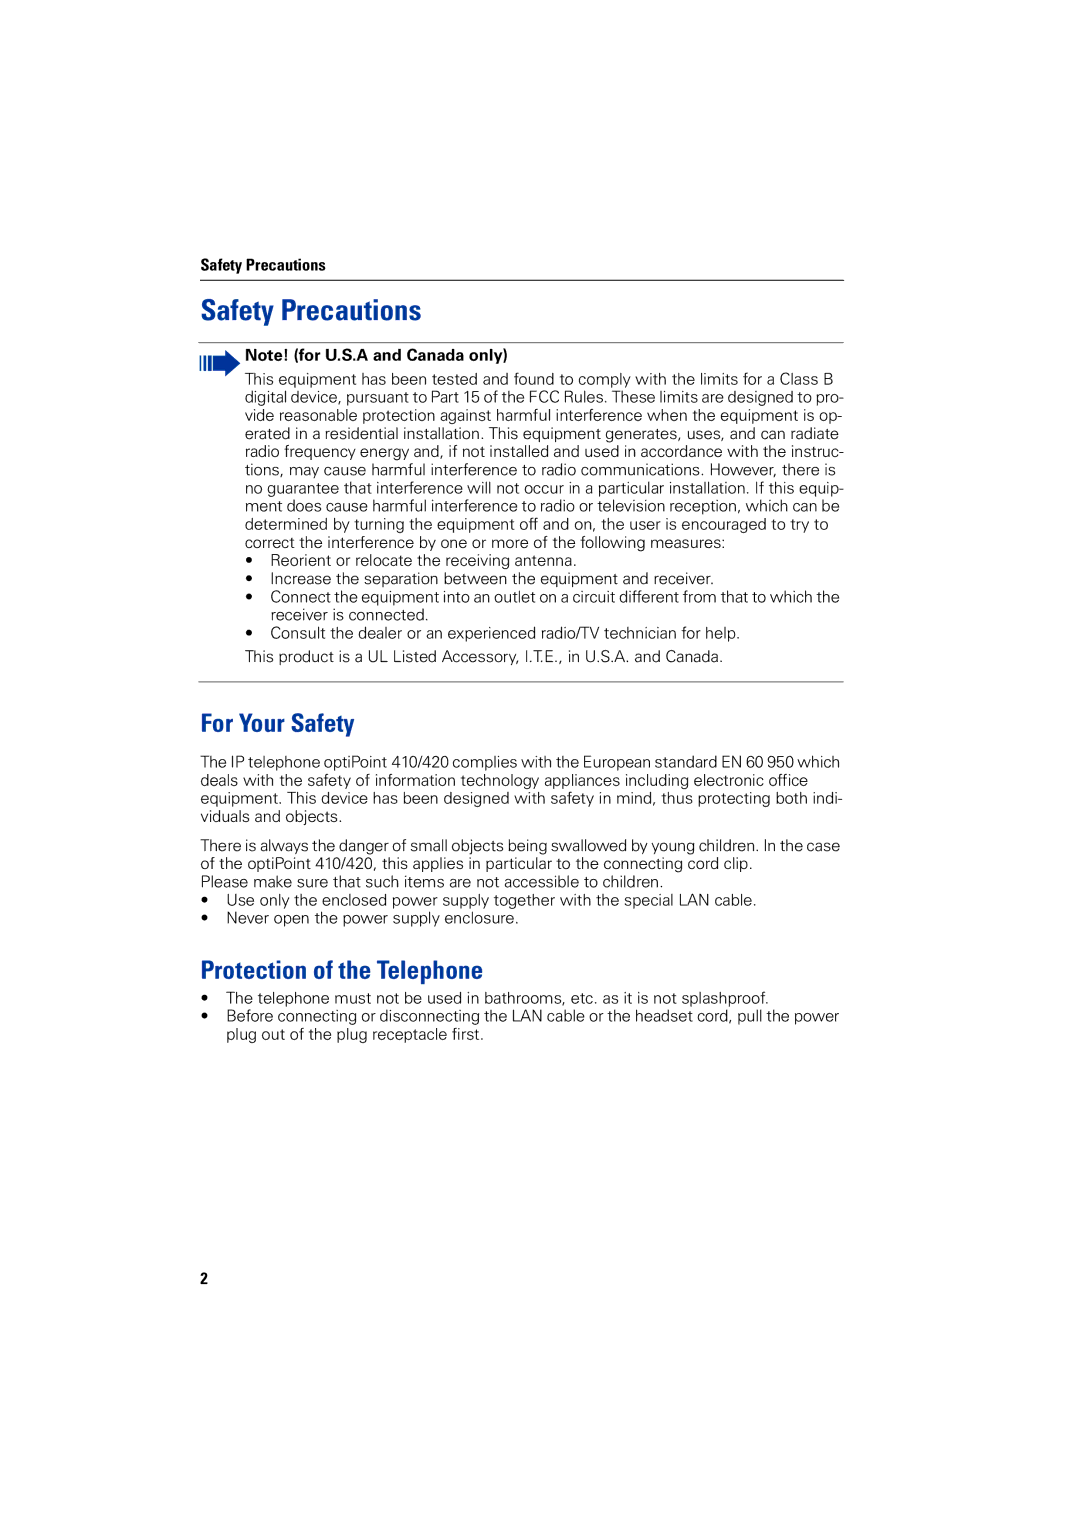 Siemens 2000 manual Safety Precautions, For Your Safety, Protection of the Telephone 